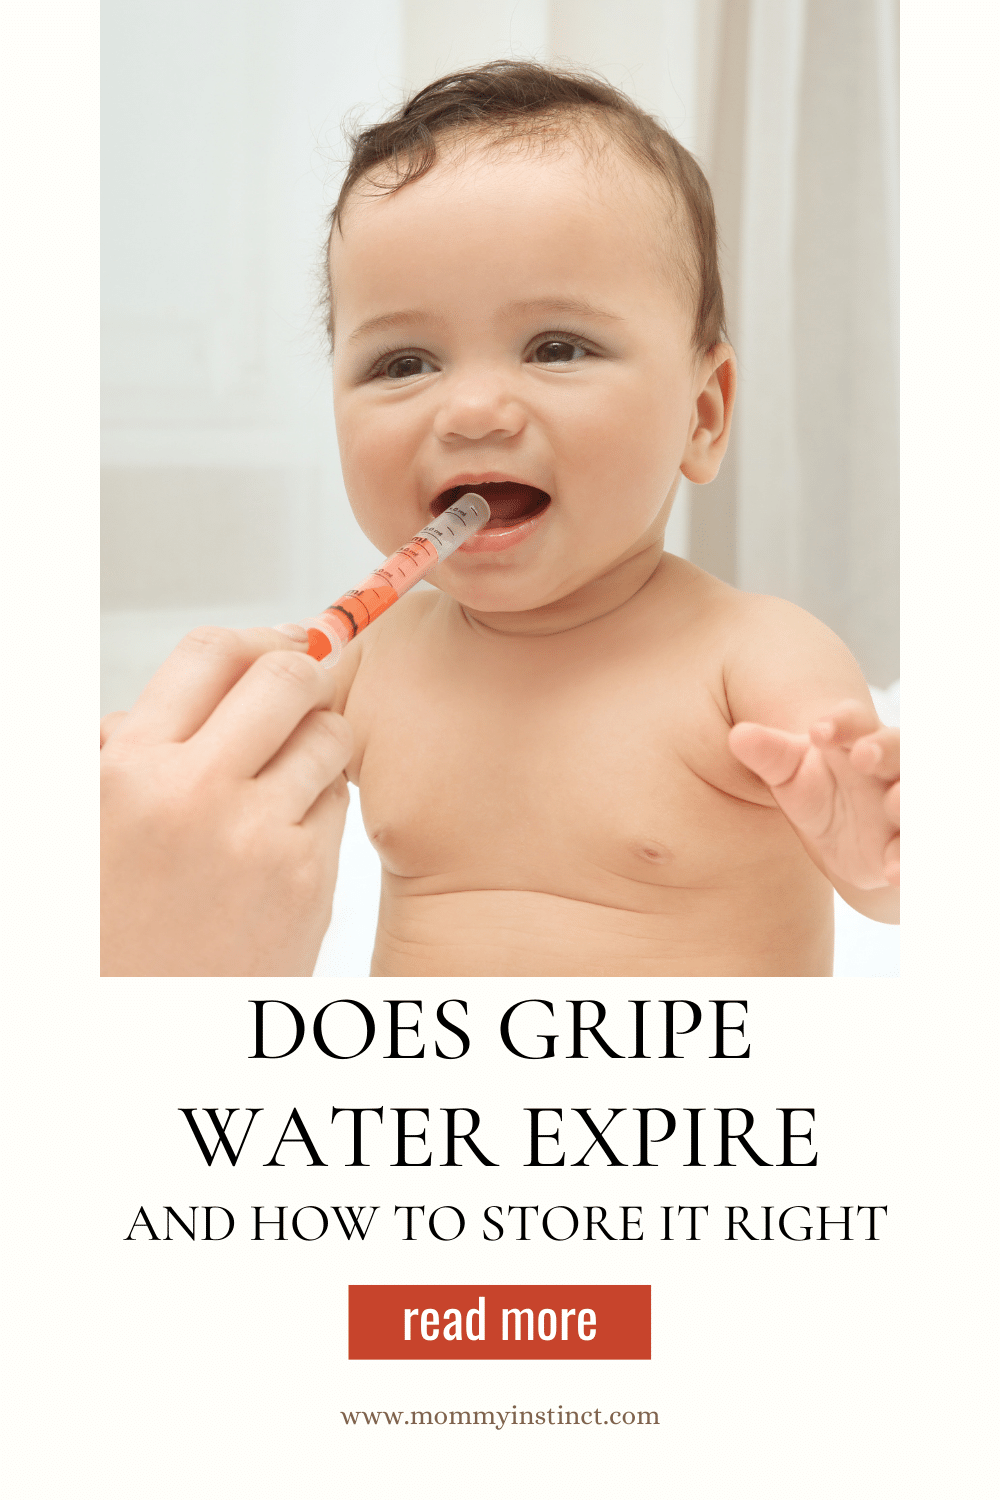 Does gripe water expire